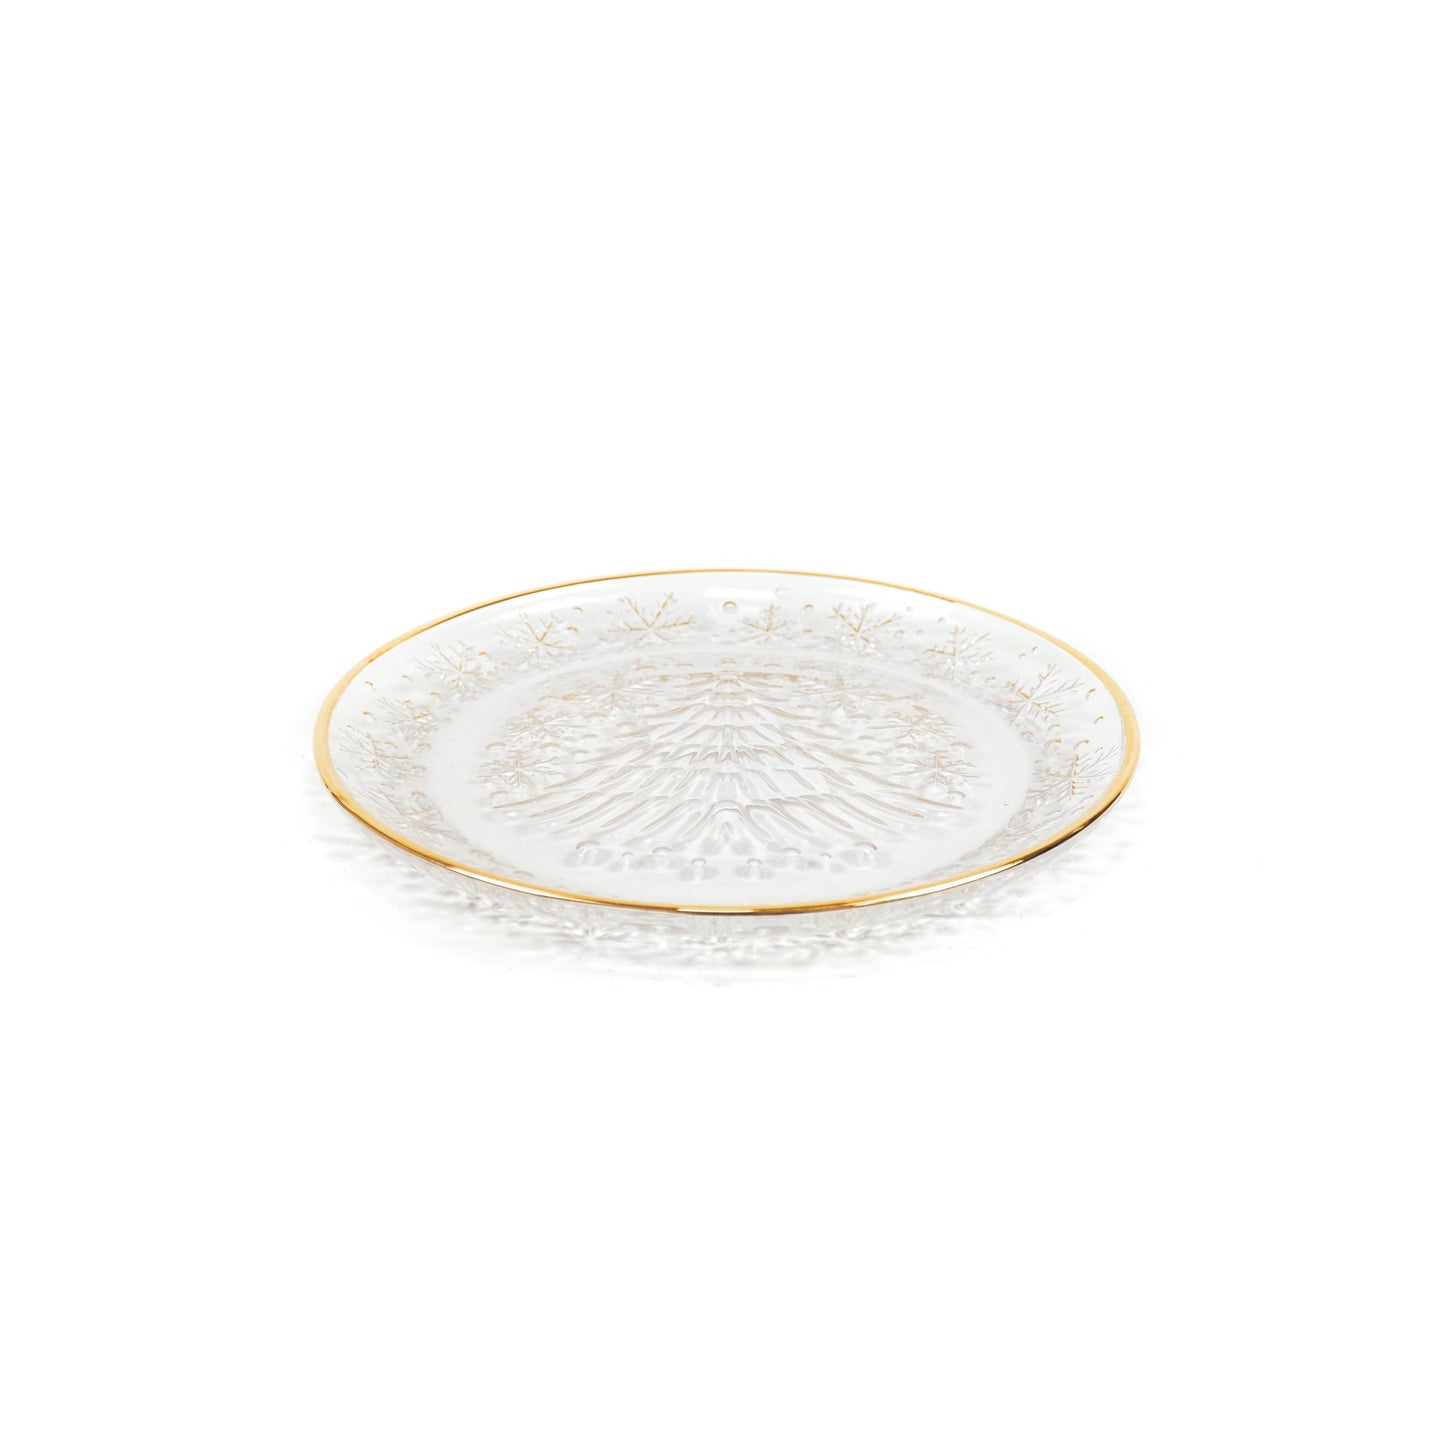 HV Dinerplate of glass with golden rim -21x2cm